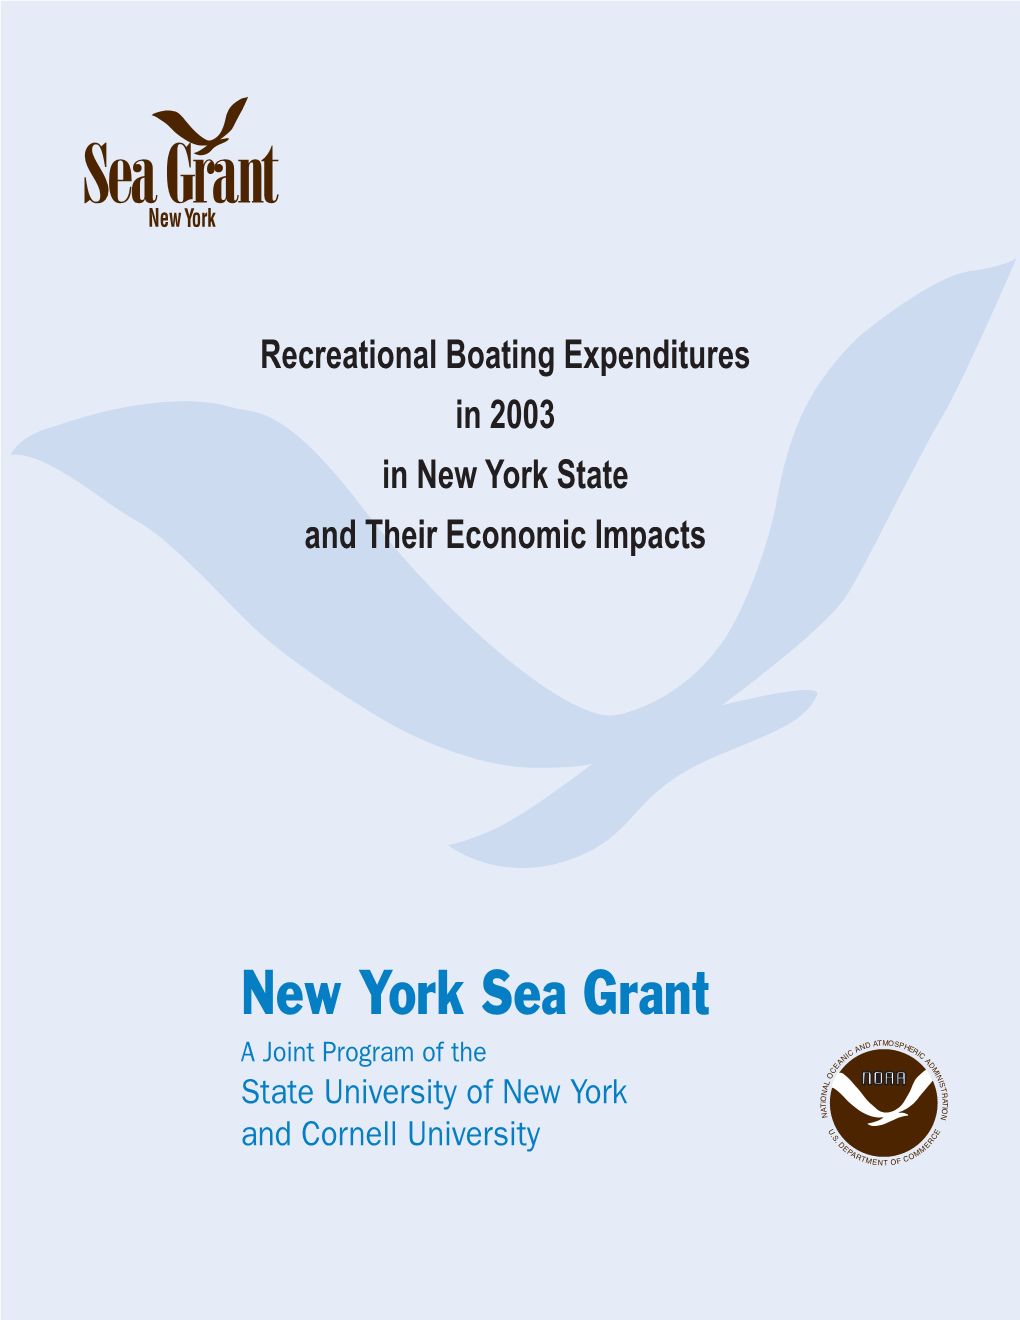 Recreational Boating Expenditures in 2003 in New York State and Their Economic Impacts